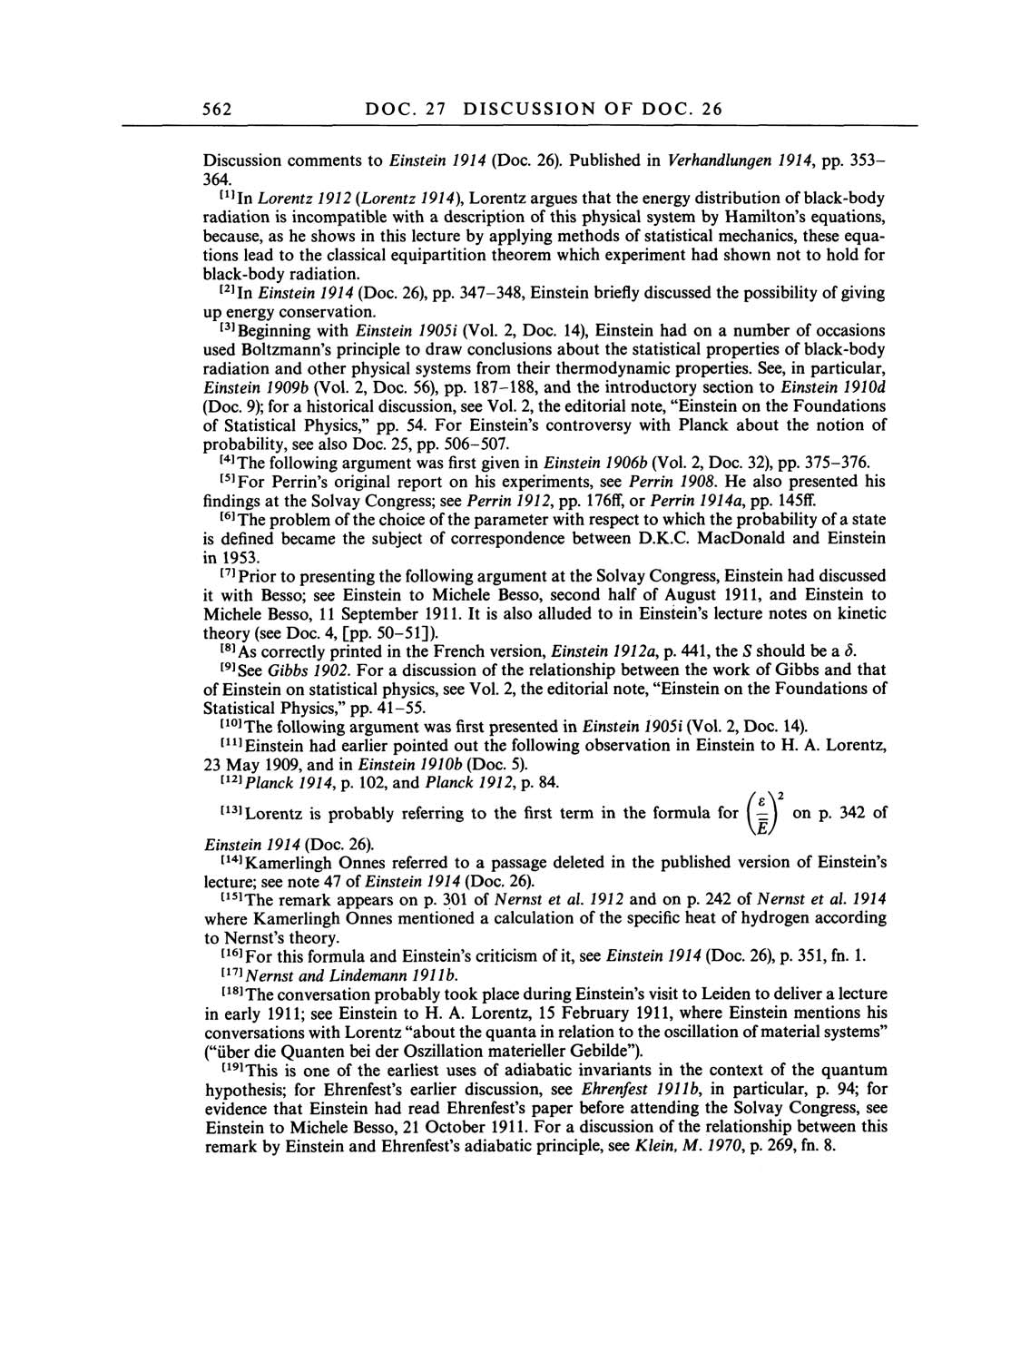 Volume 3: The Swiss Years: Writings 1909-1911 page 562